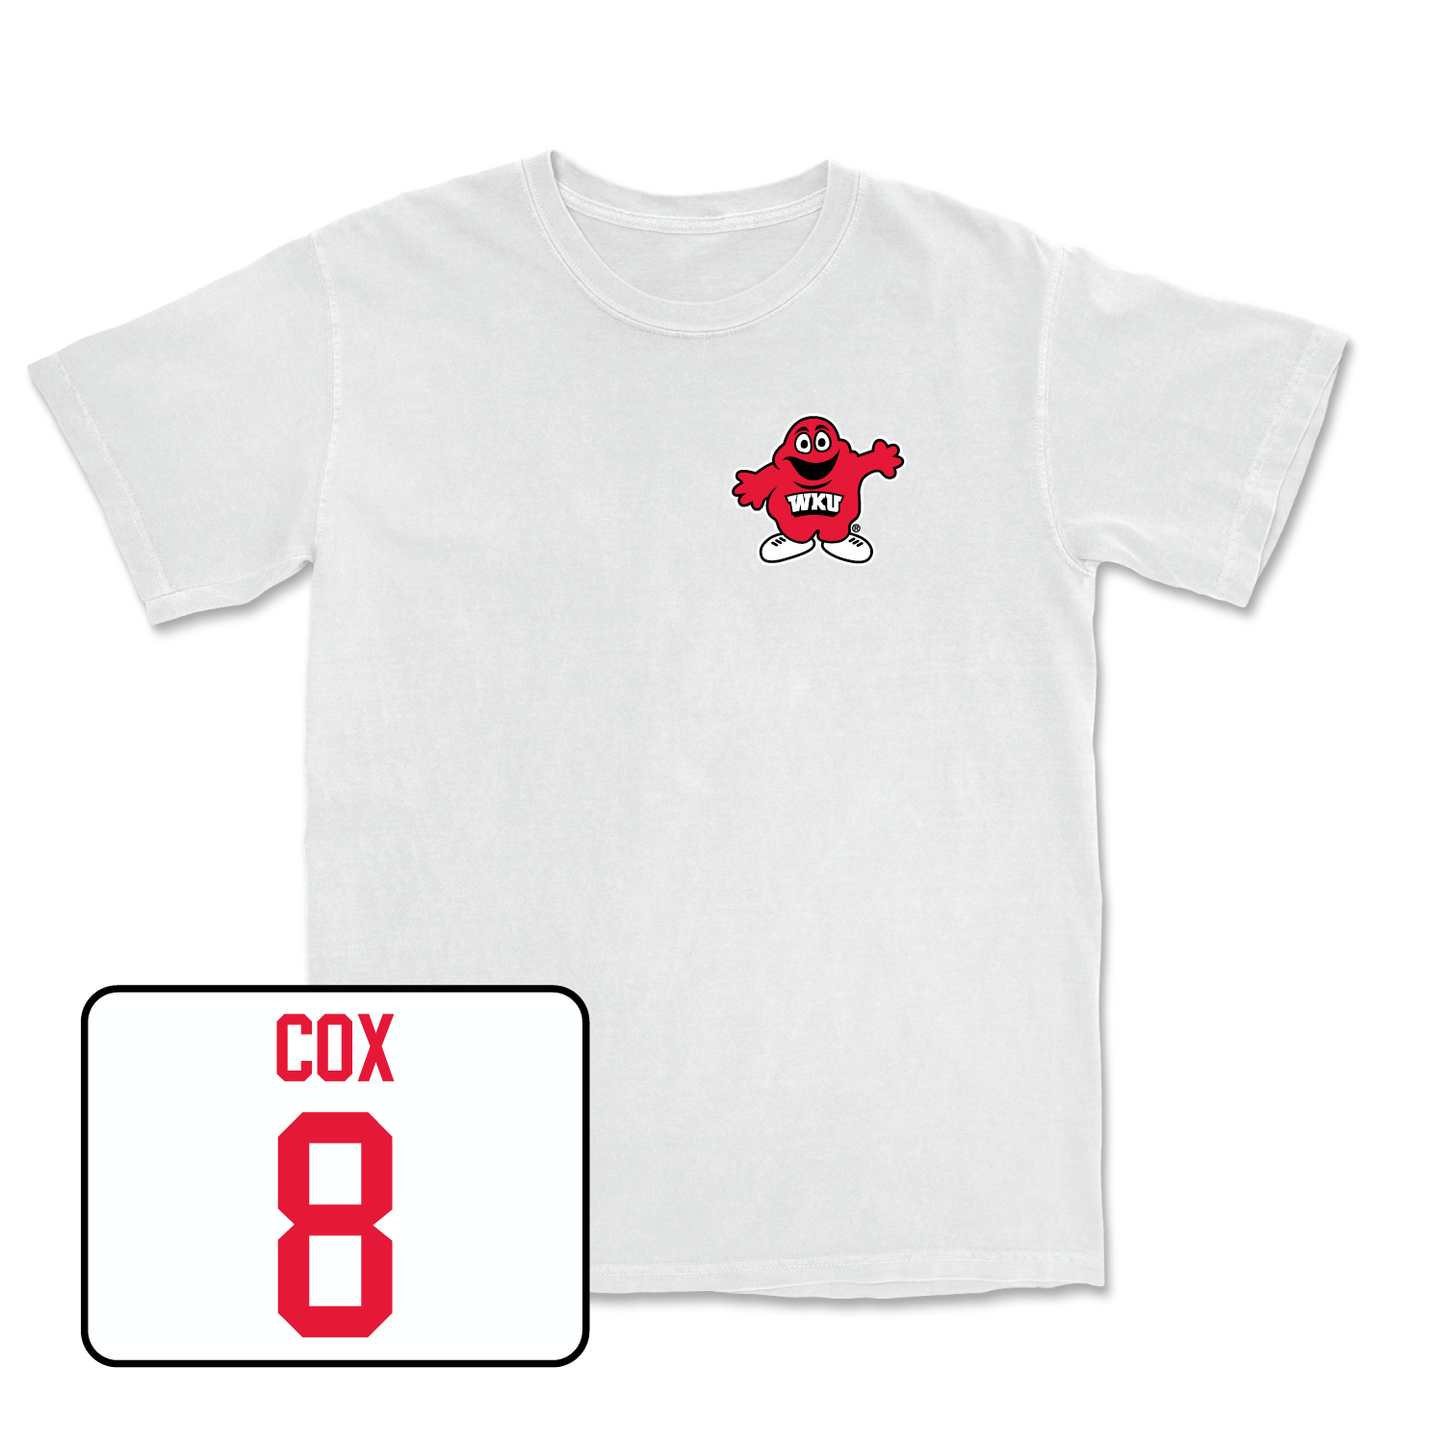 White Women's Volleyball Big Red Comfort Colors Tee X-Large / Kaylee Cox | #8